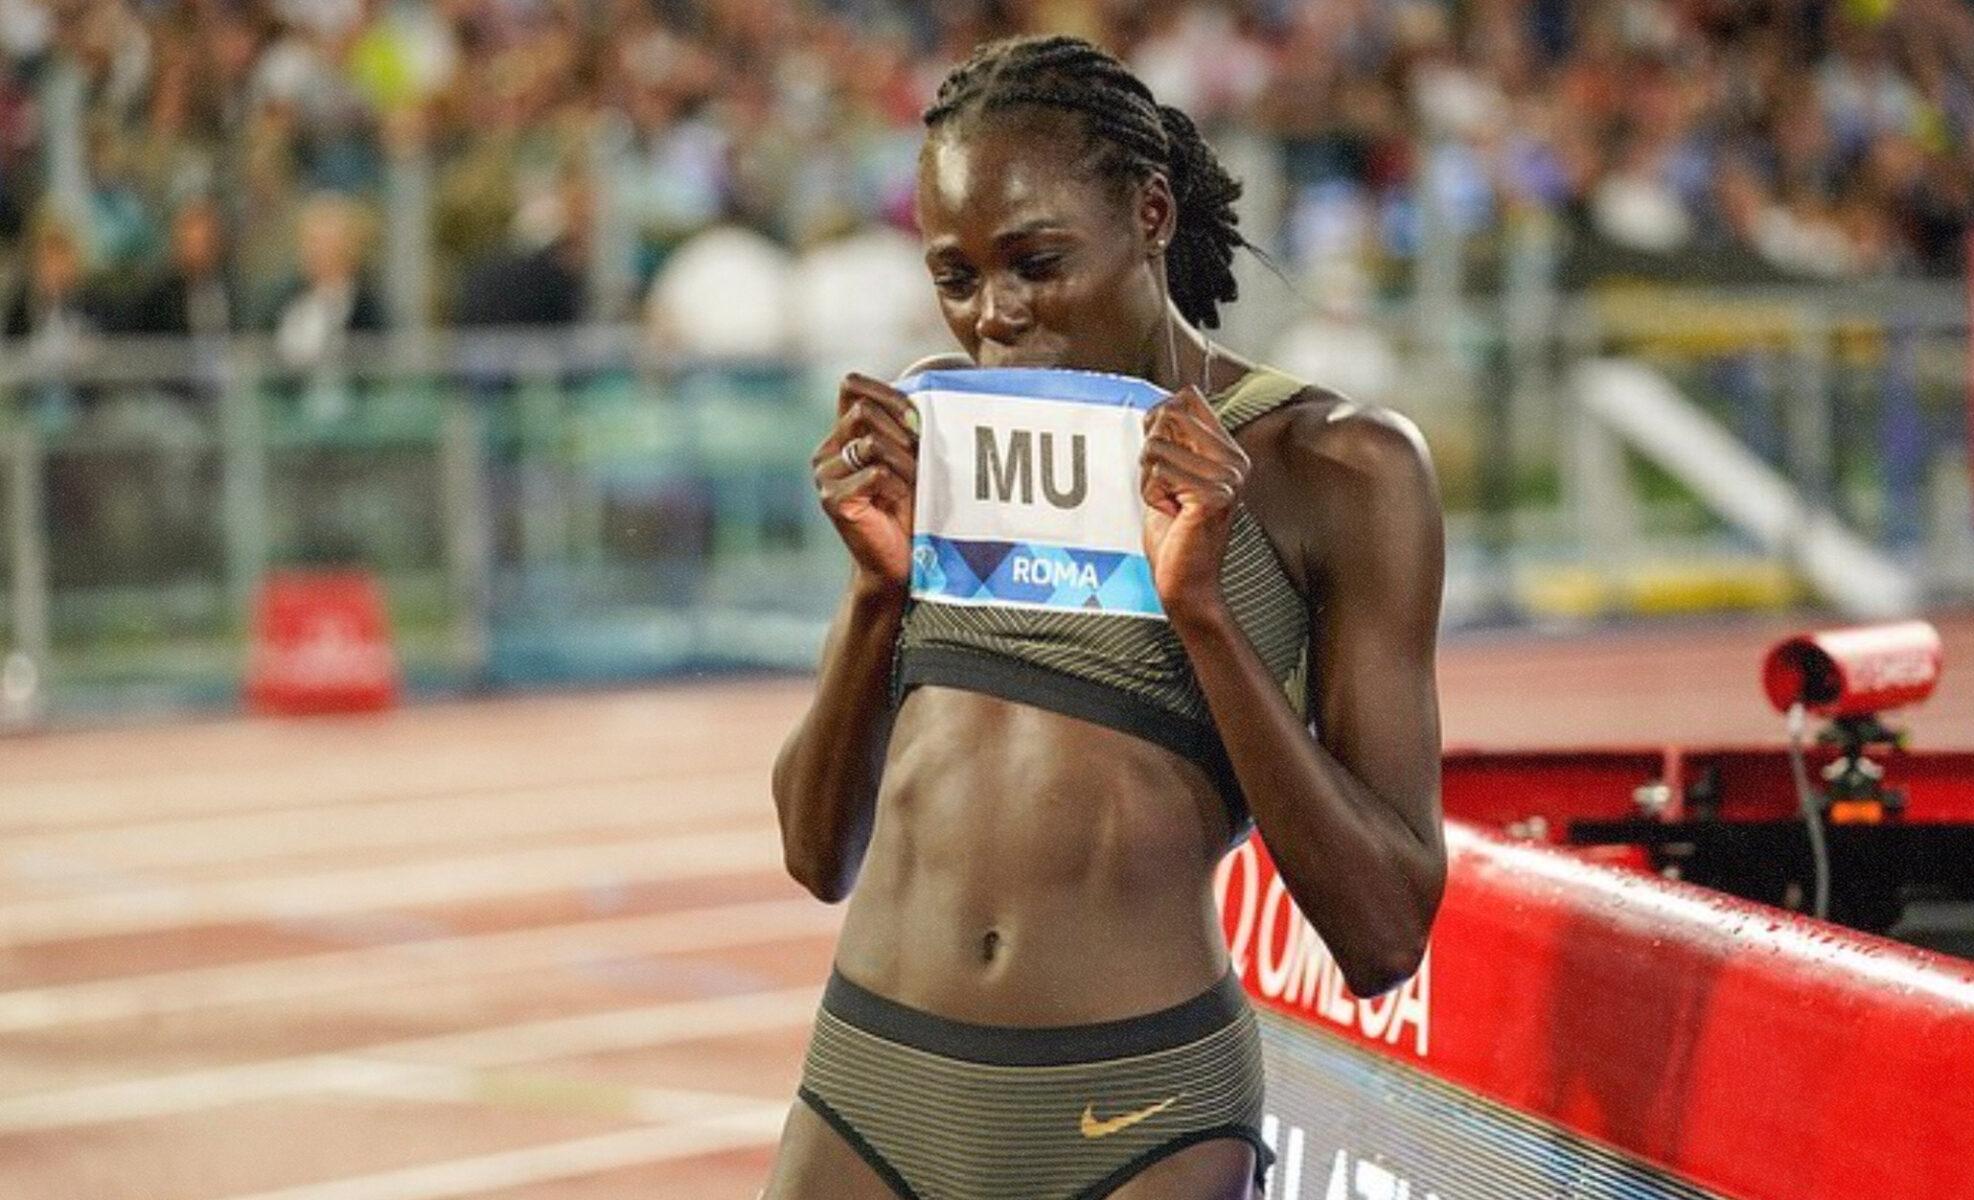 Athing Mu, 19, could be next US middle-distance Olympic track star